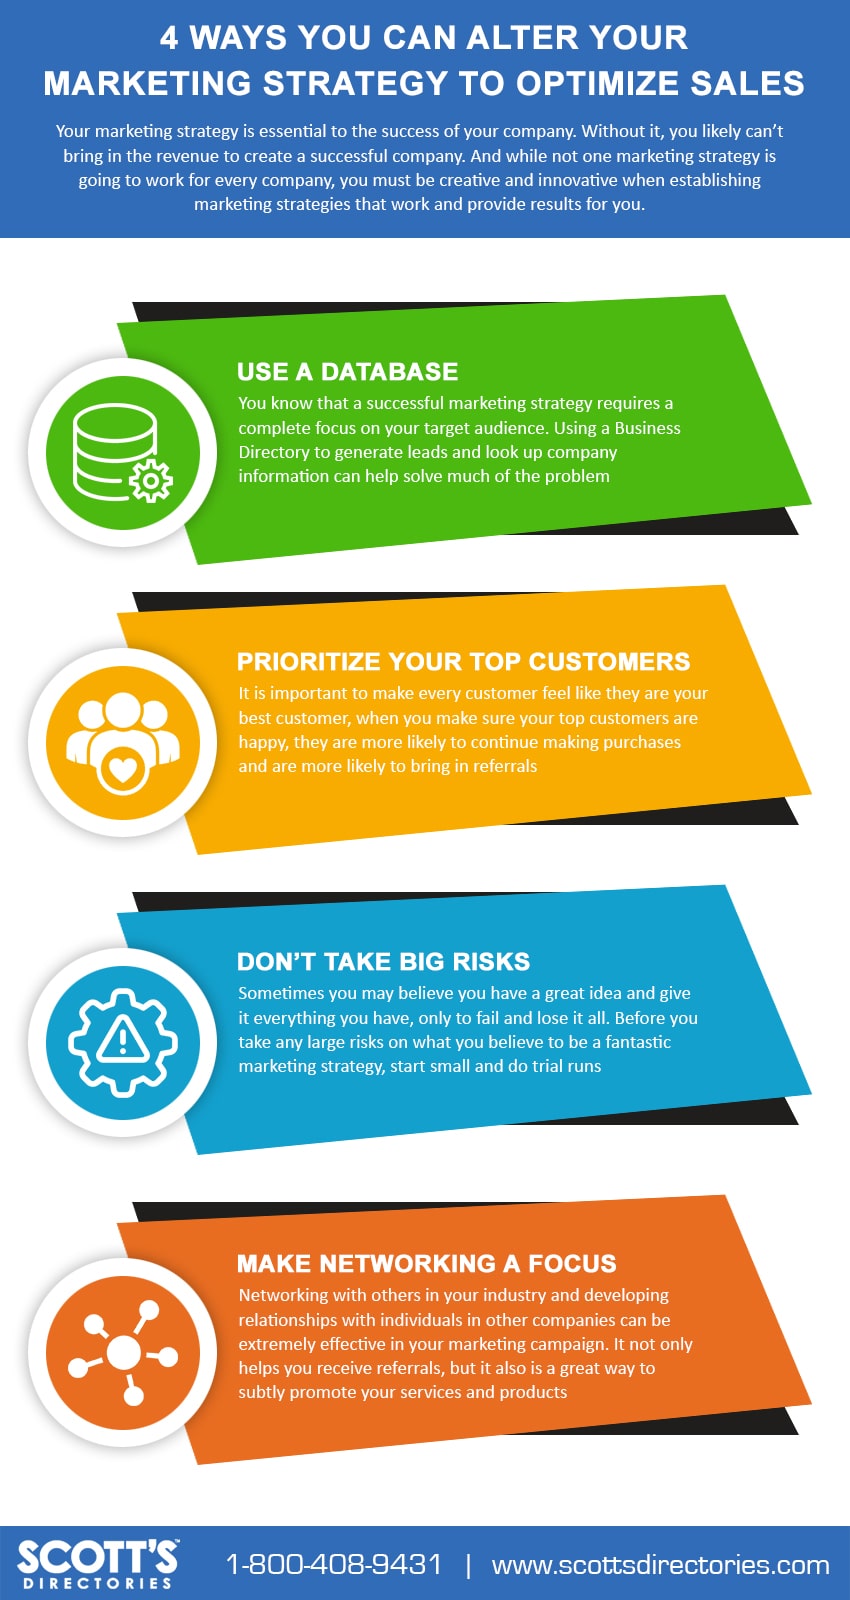 4 ways you can alter your marketing strategy to optimize sales - Infographic image